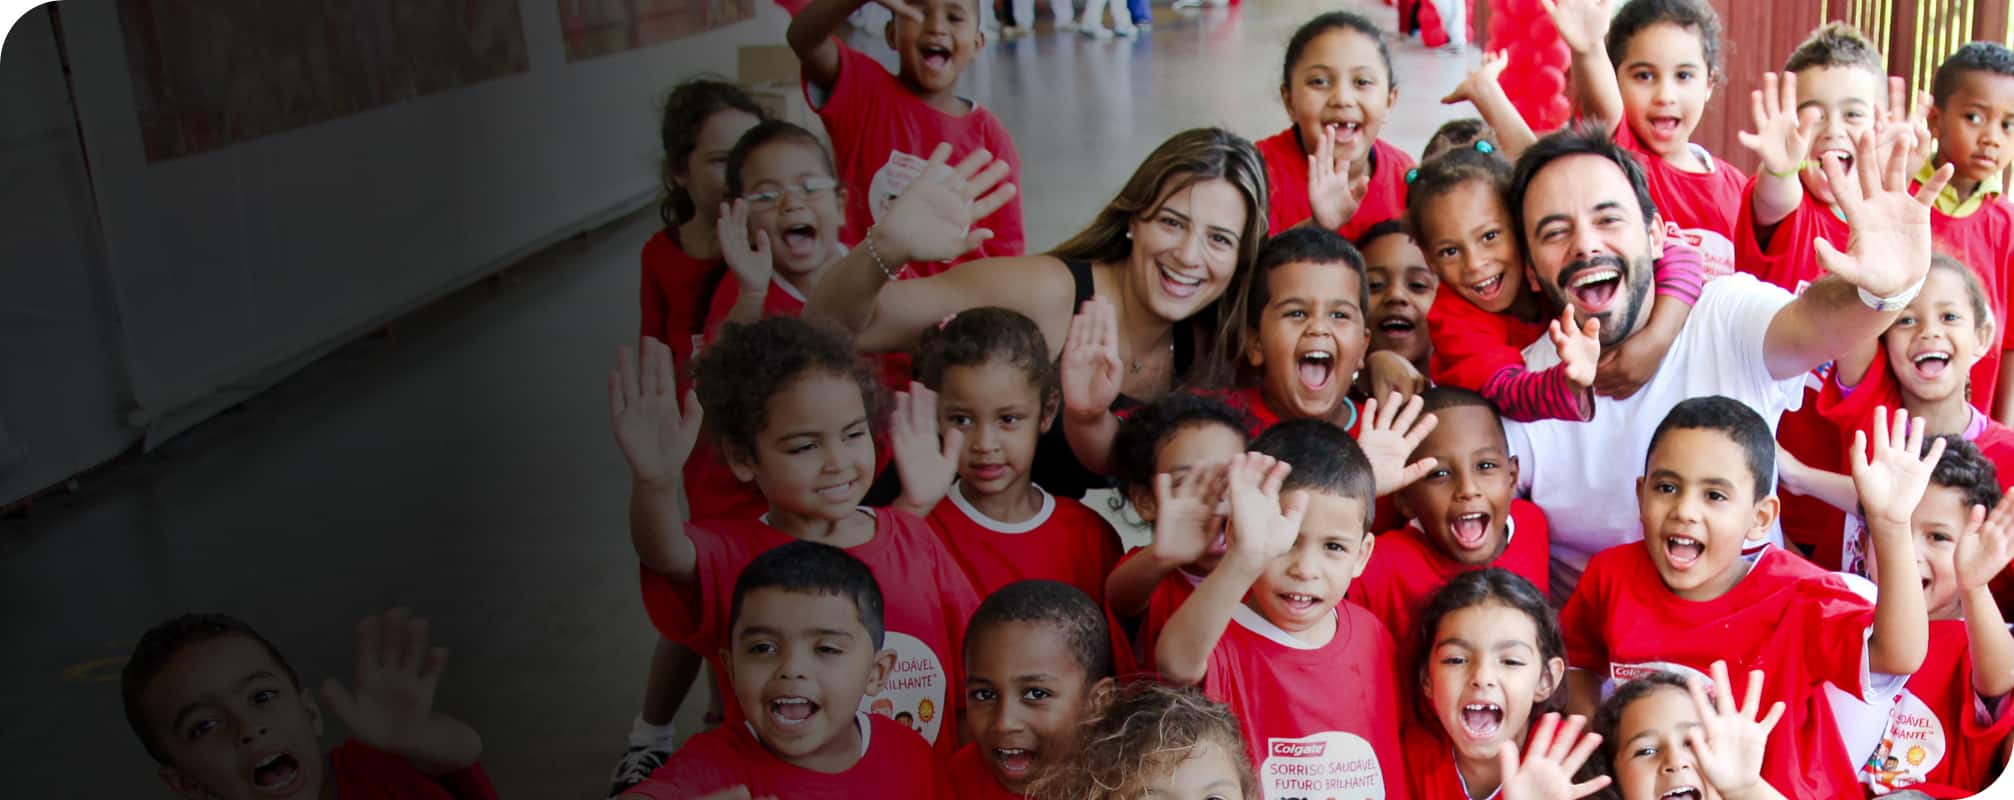 children smiling at bsbf colgate event in brazil